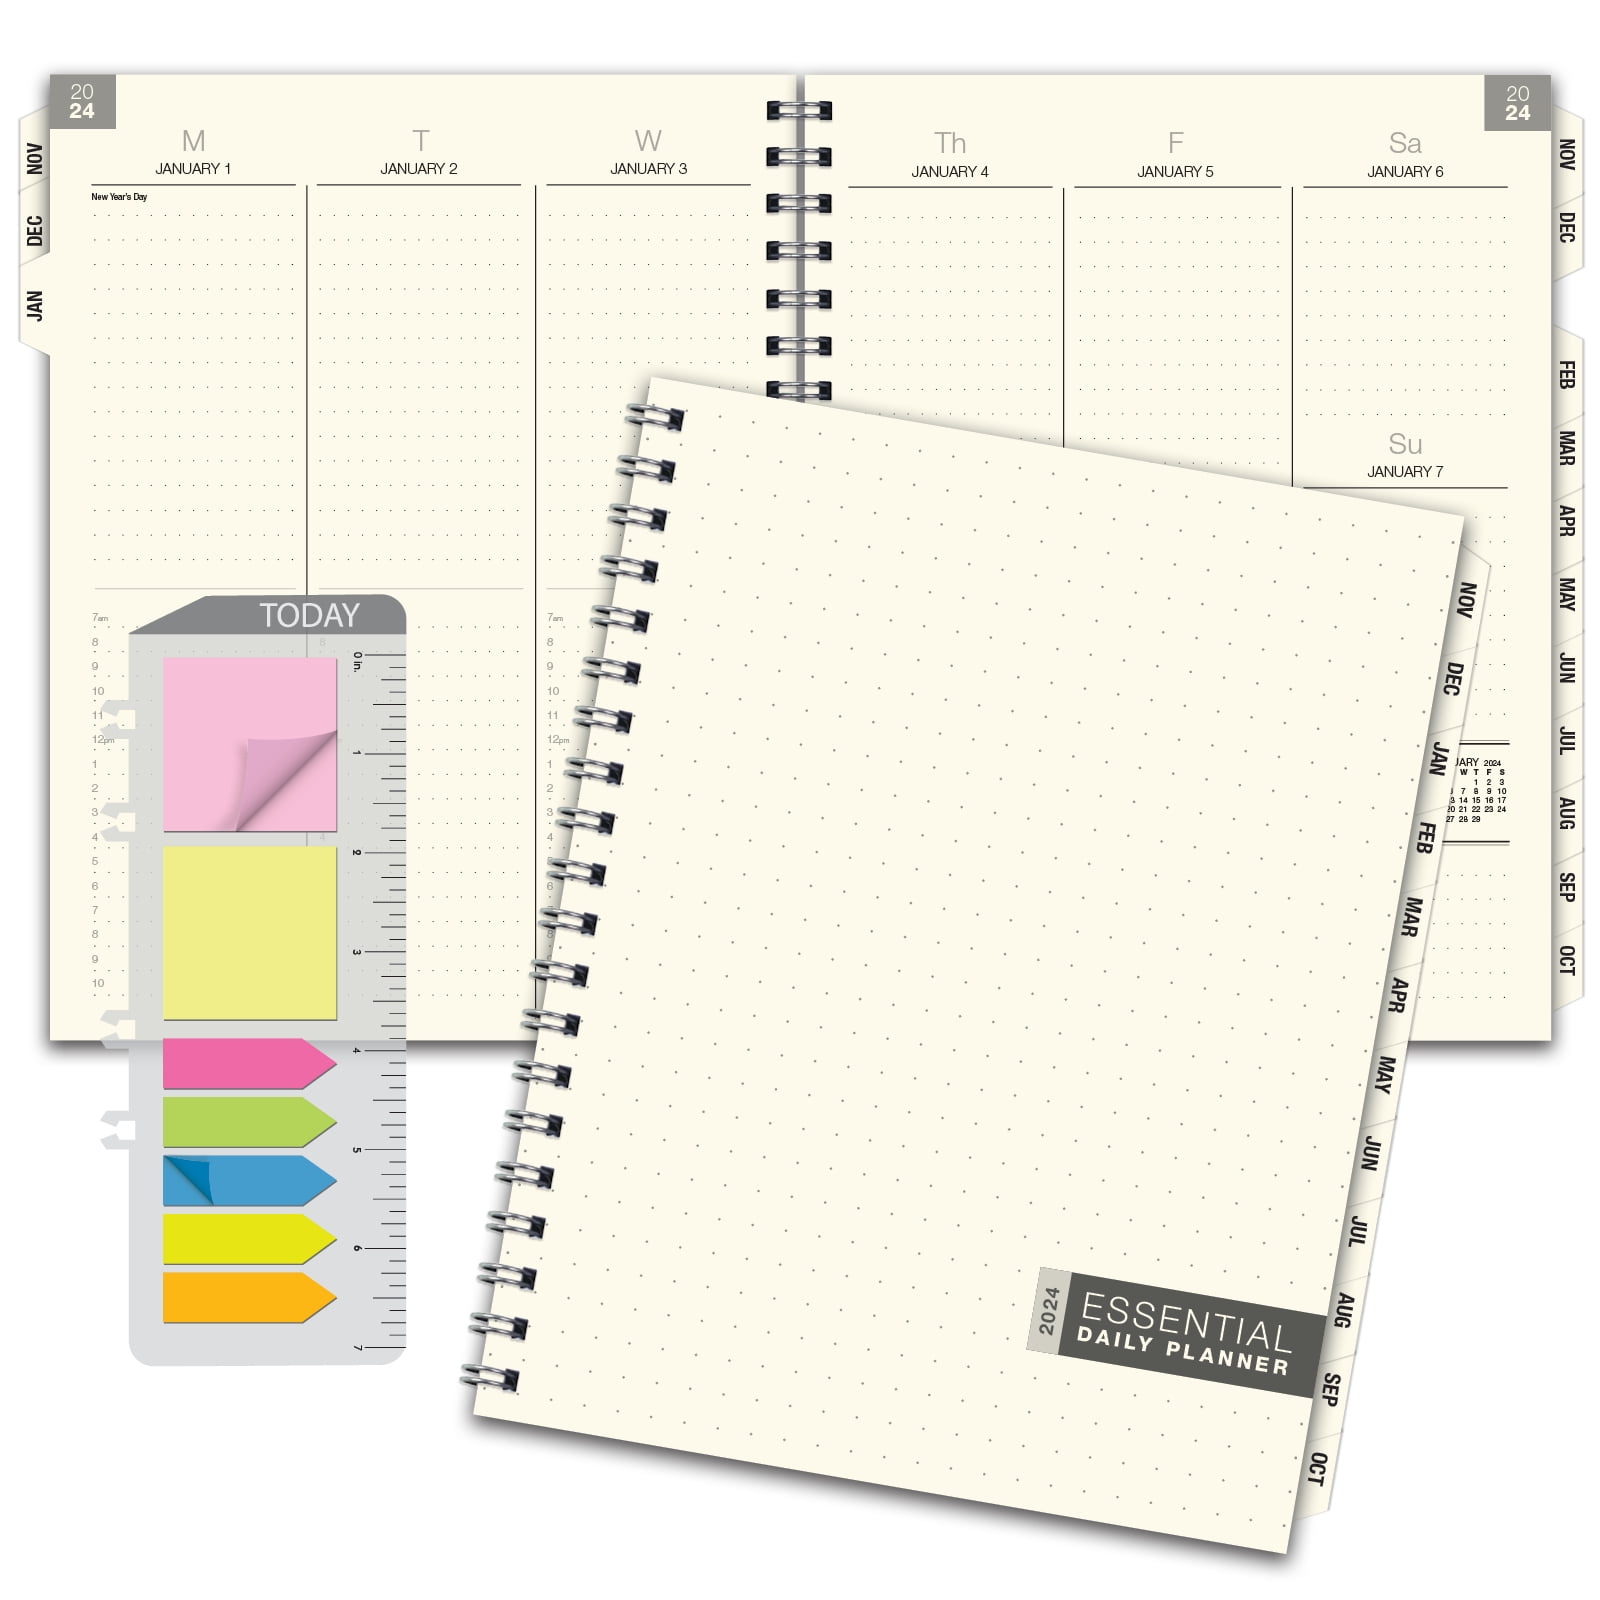 1pc Weekly Planner Notepad 9.5*7.5 In Daily Weekly Agenda 52 Sheets Notepad  Organizer With Space For Daily Schedule, To Do List And Habit Tracker